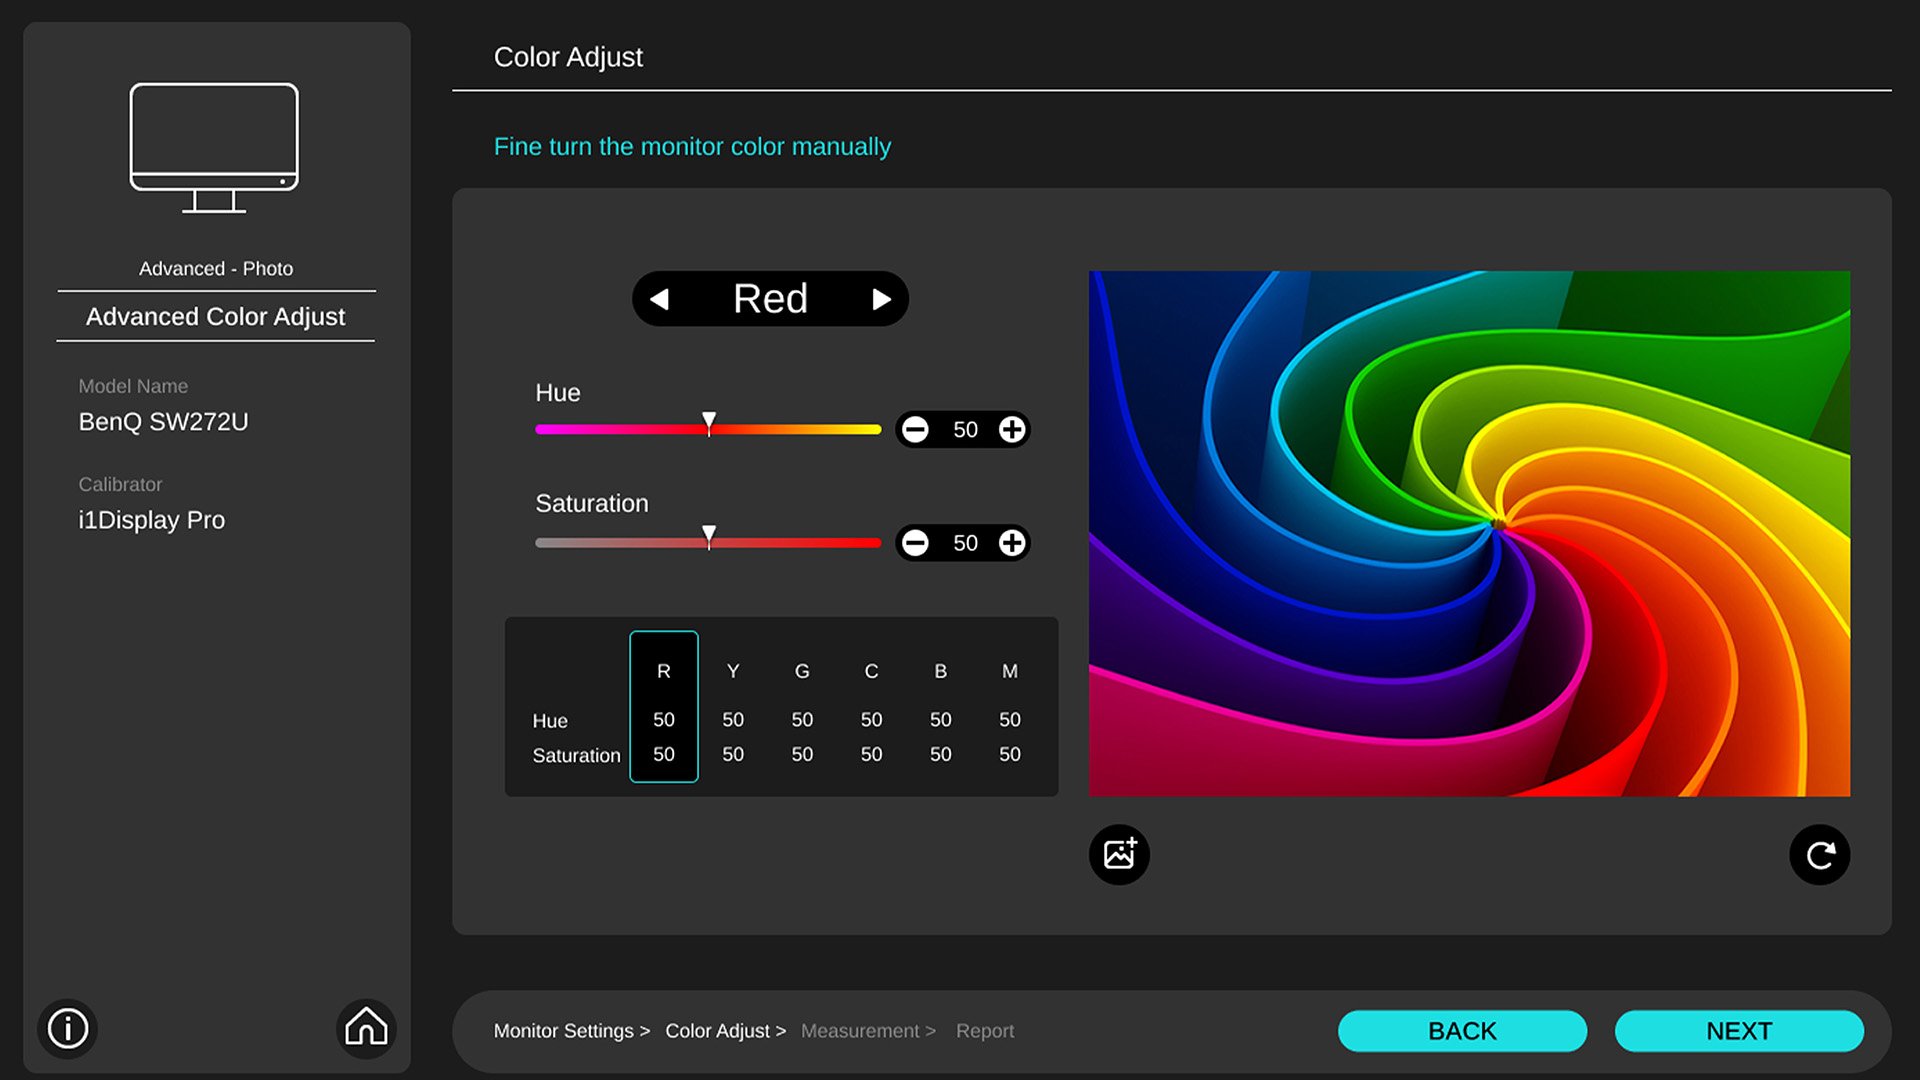 BenQ Palette Master Ultimate supports further fine-tune colour after calibration, users can adjust colour temperature, hue, and saturation in the Colour Adjust section.